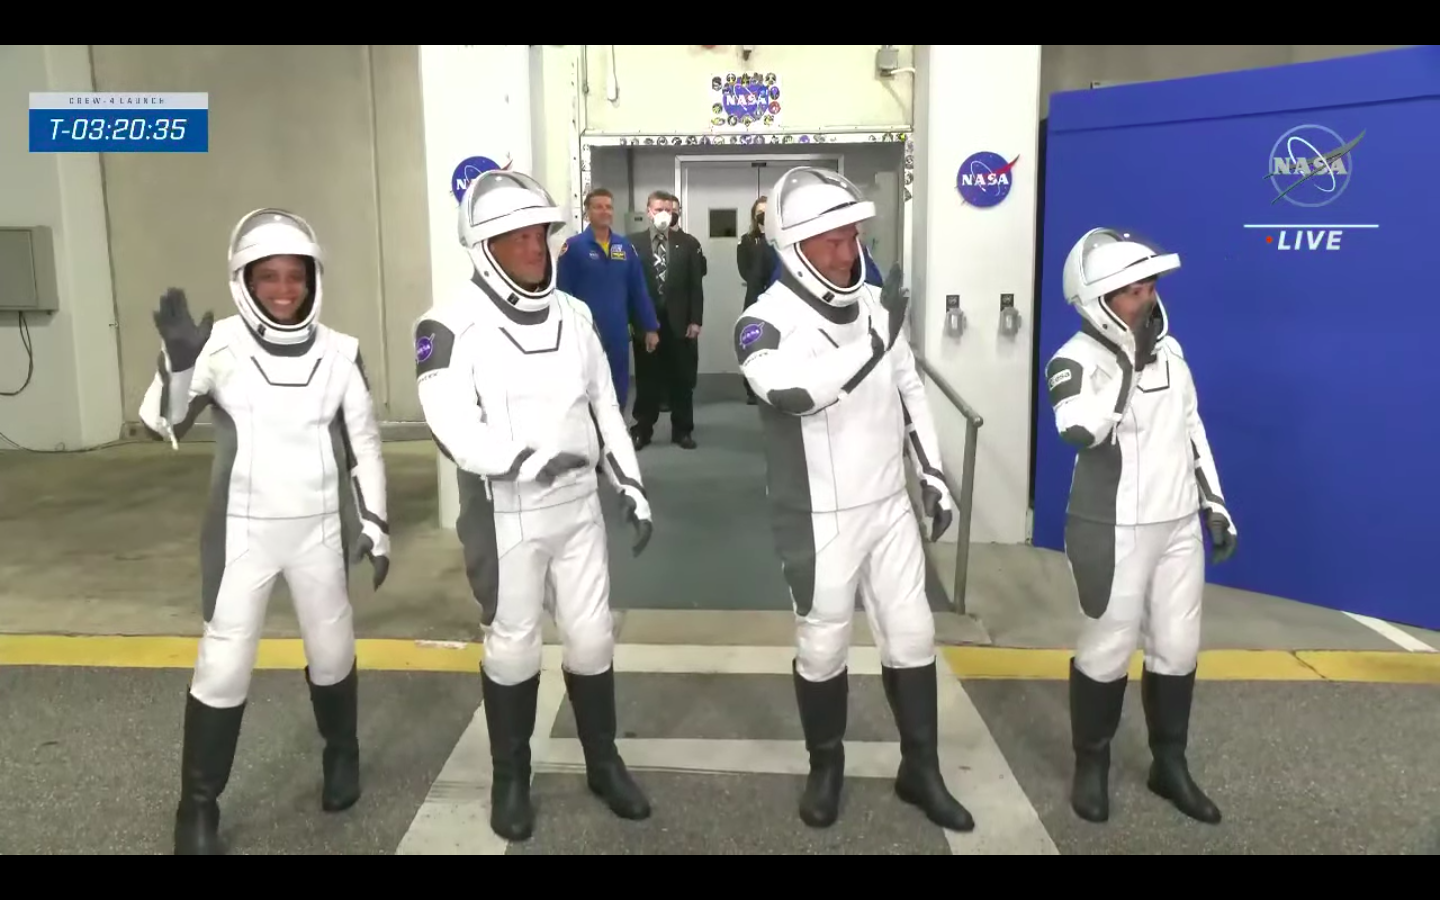 The Crew-4 astronauts walk out of the Neil Armstrong Operations and Checkout Building at NASA's Kennedy Space Center at about 12:30 a.m. EDT (0430 GMT) on April 27, 2022. They soon got into Teslas that drove them to KSC's Launch Pad 39A.